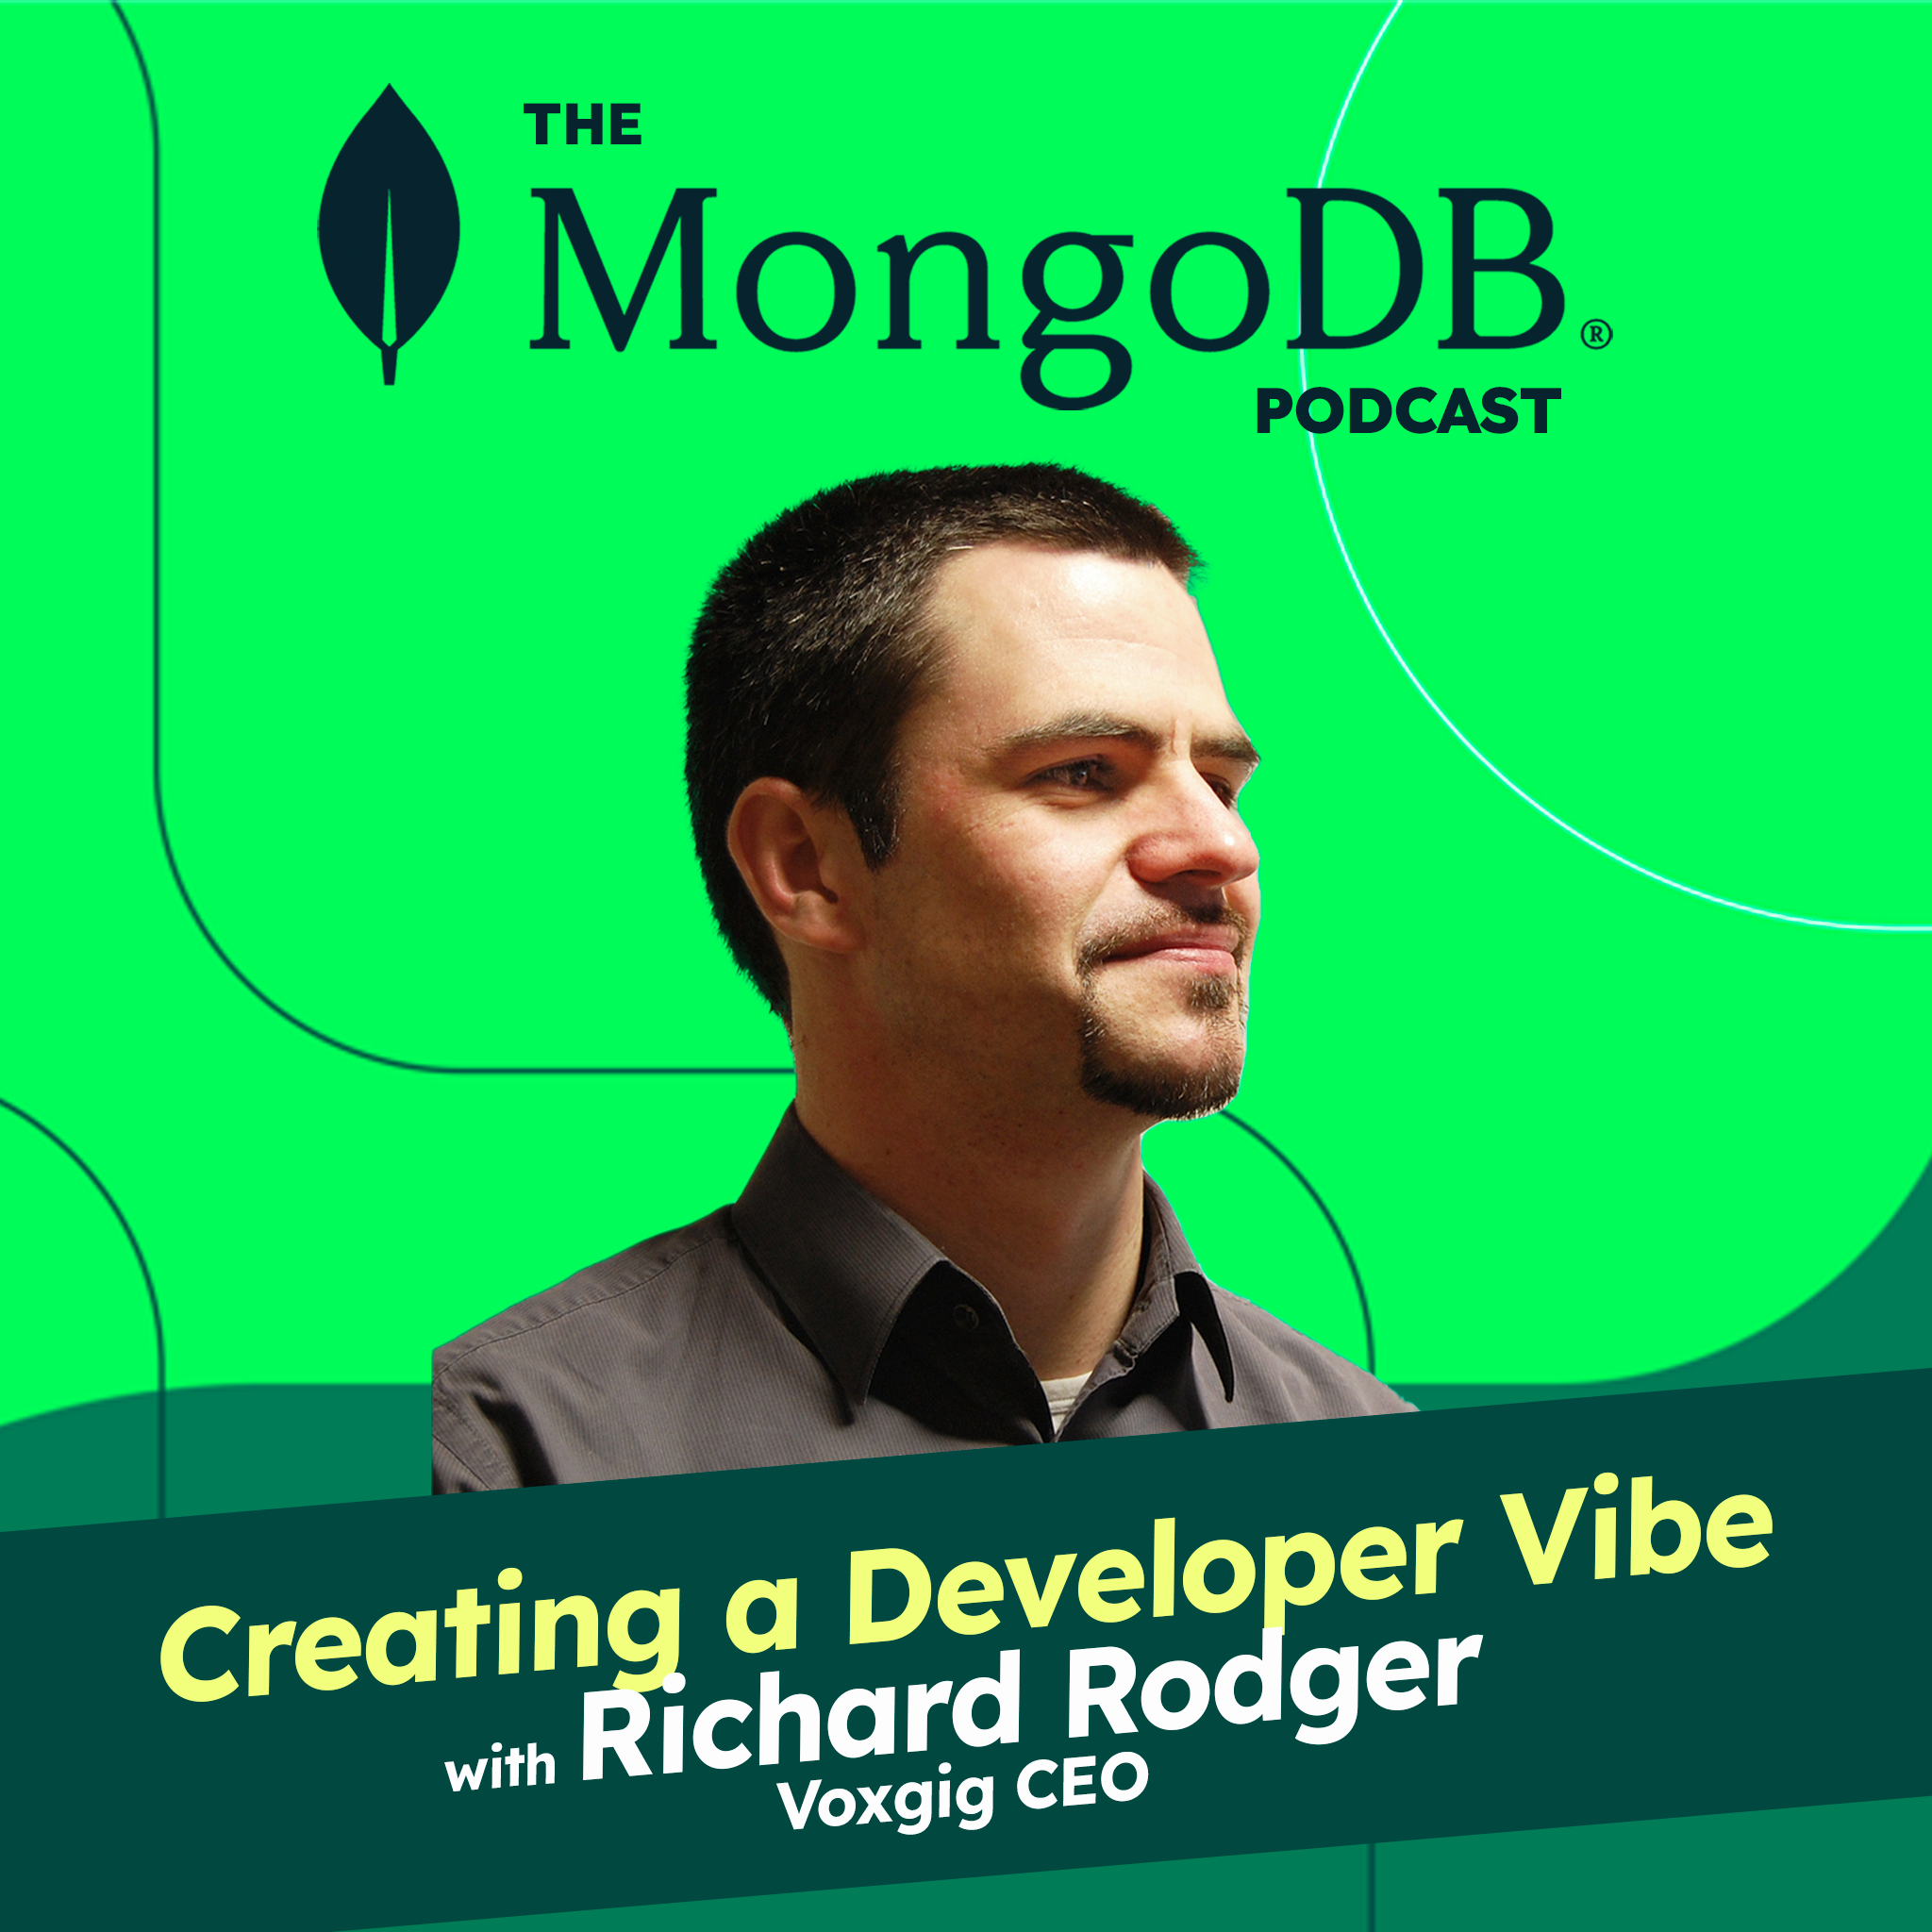 Ep. 164 Creating a Developer Vibe - A Developer Relations conversation with Richard Rodger, Voxgig CEO